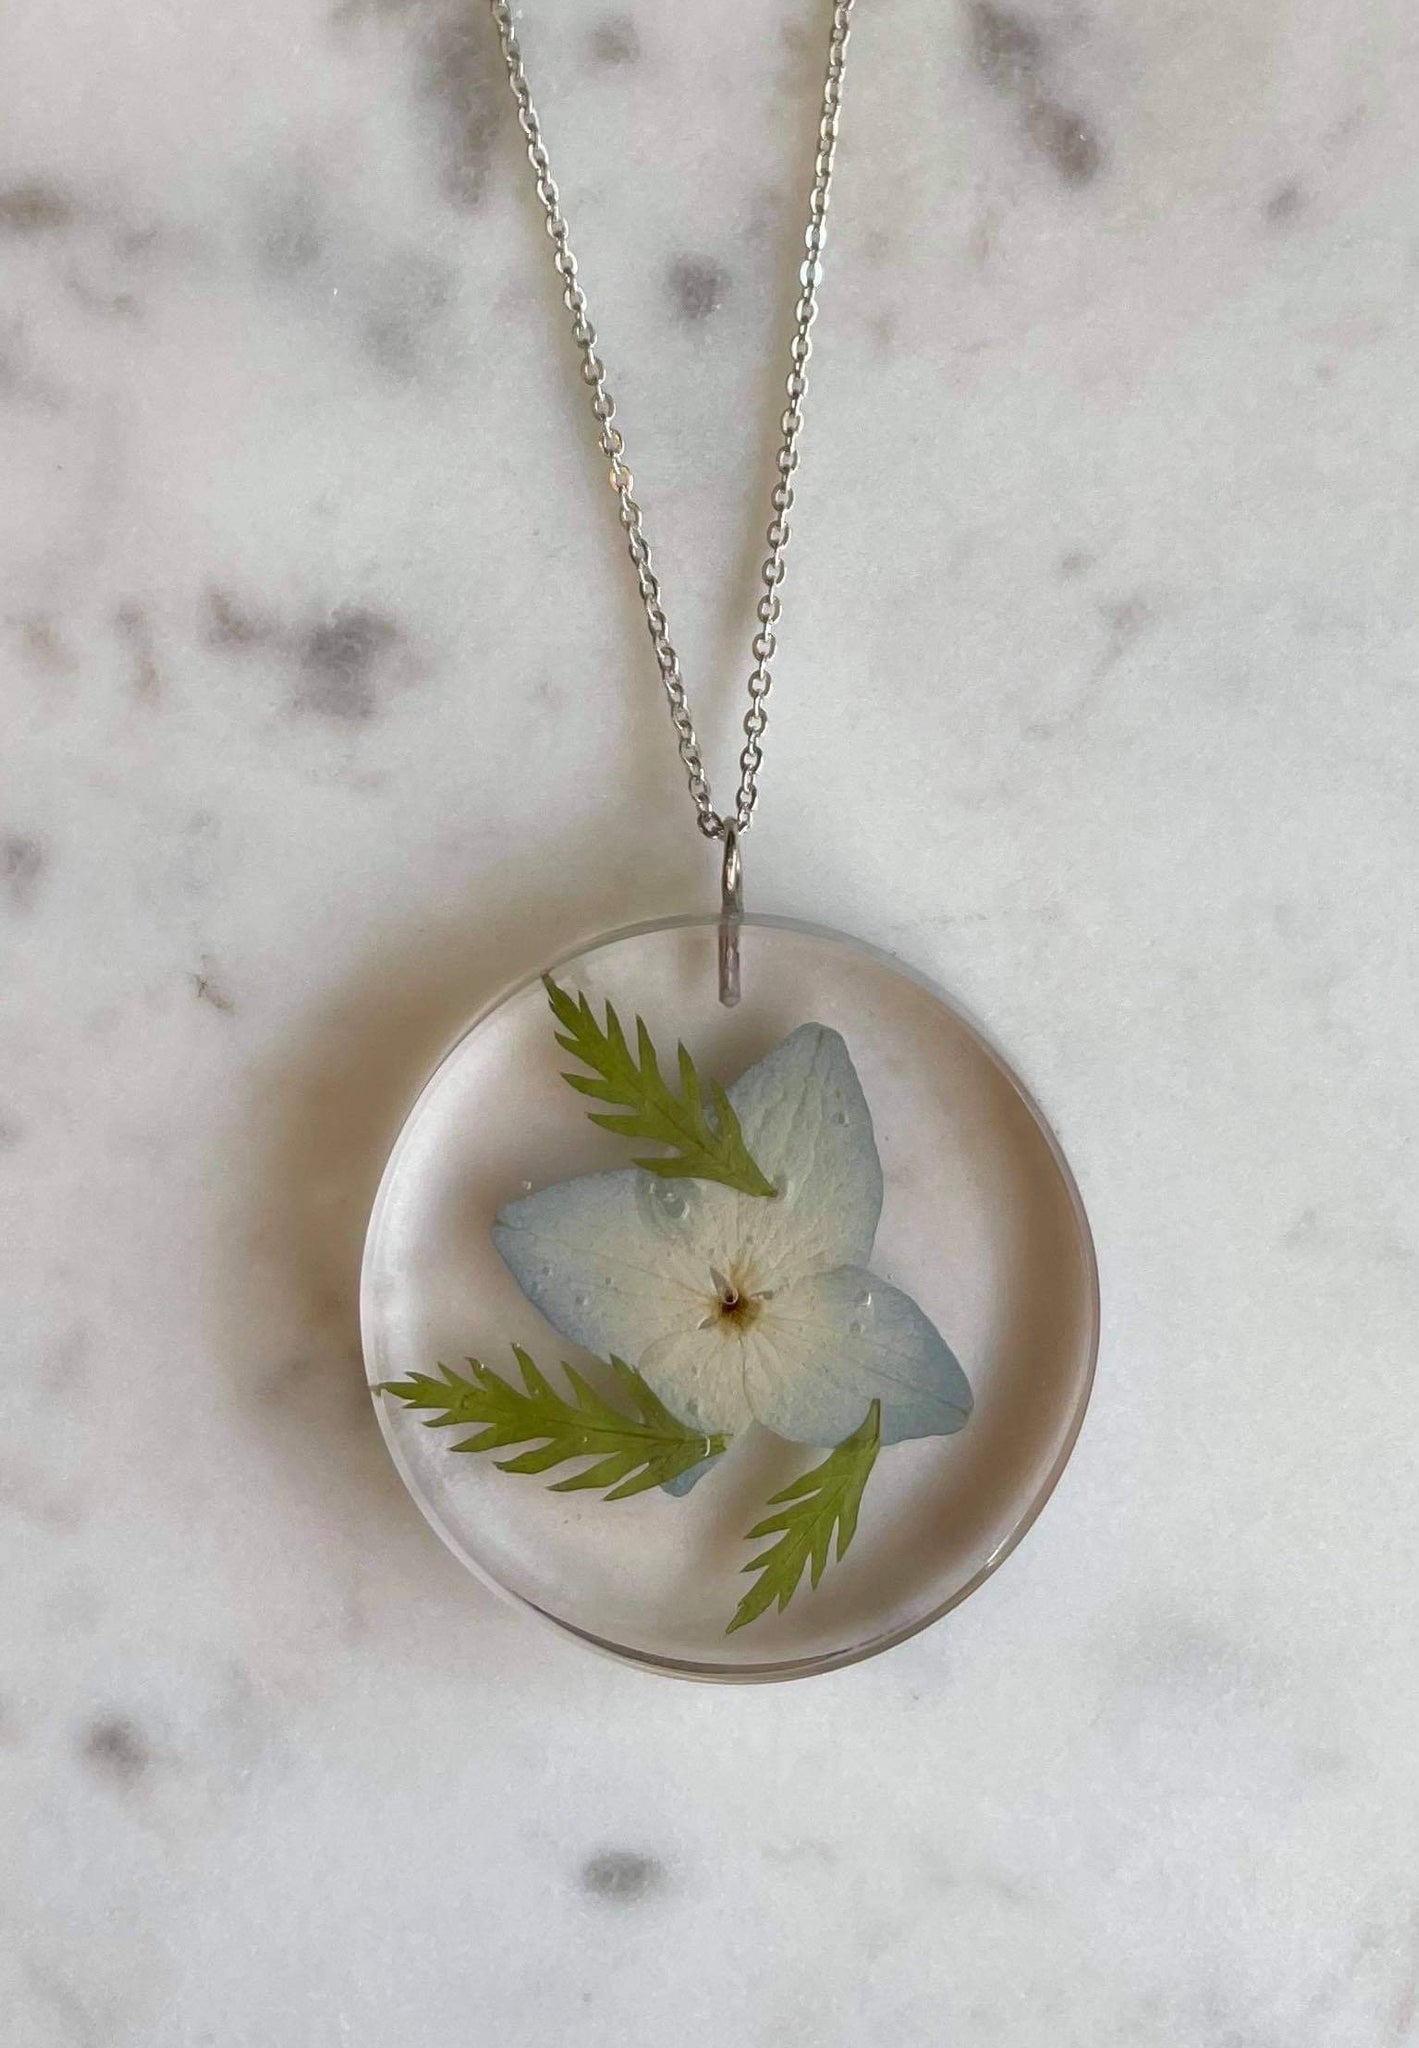 SOLD OUT. Hydrangea/Fern Necklace